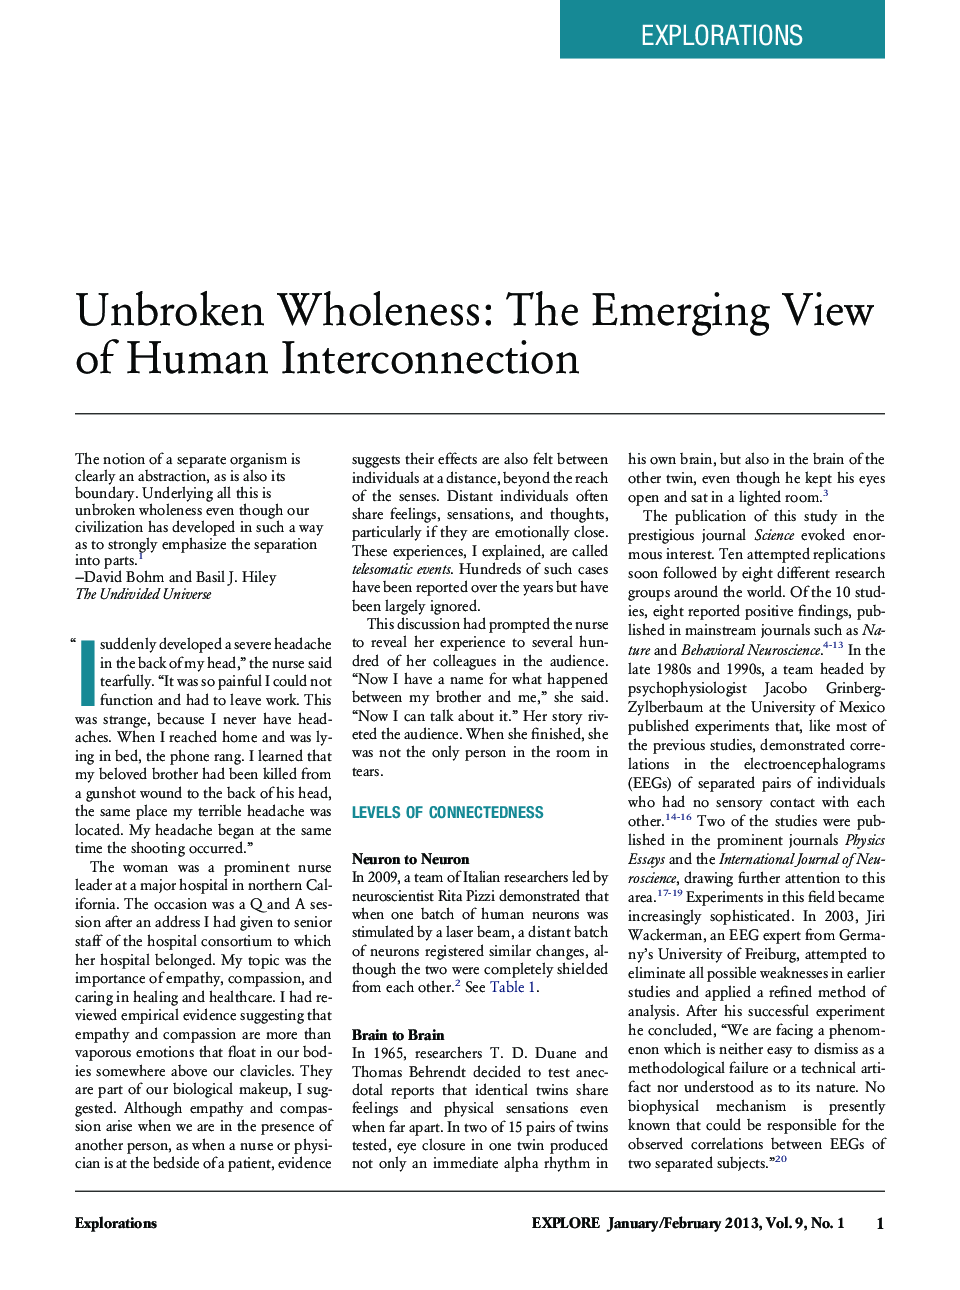 Unbroken Wholeness: The Emerging View of Human Interconnection